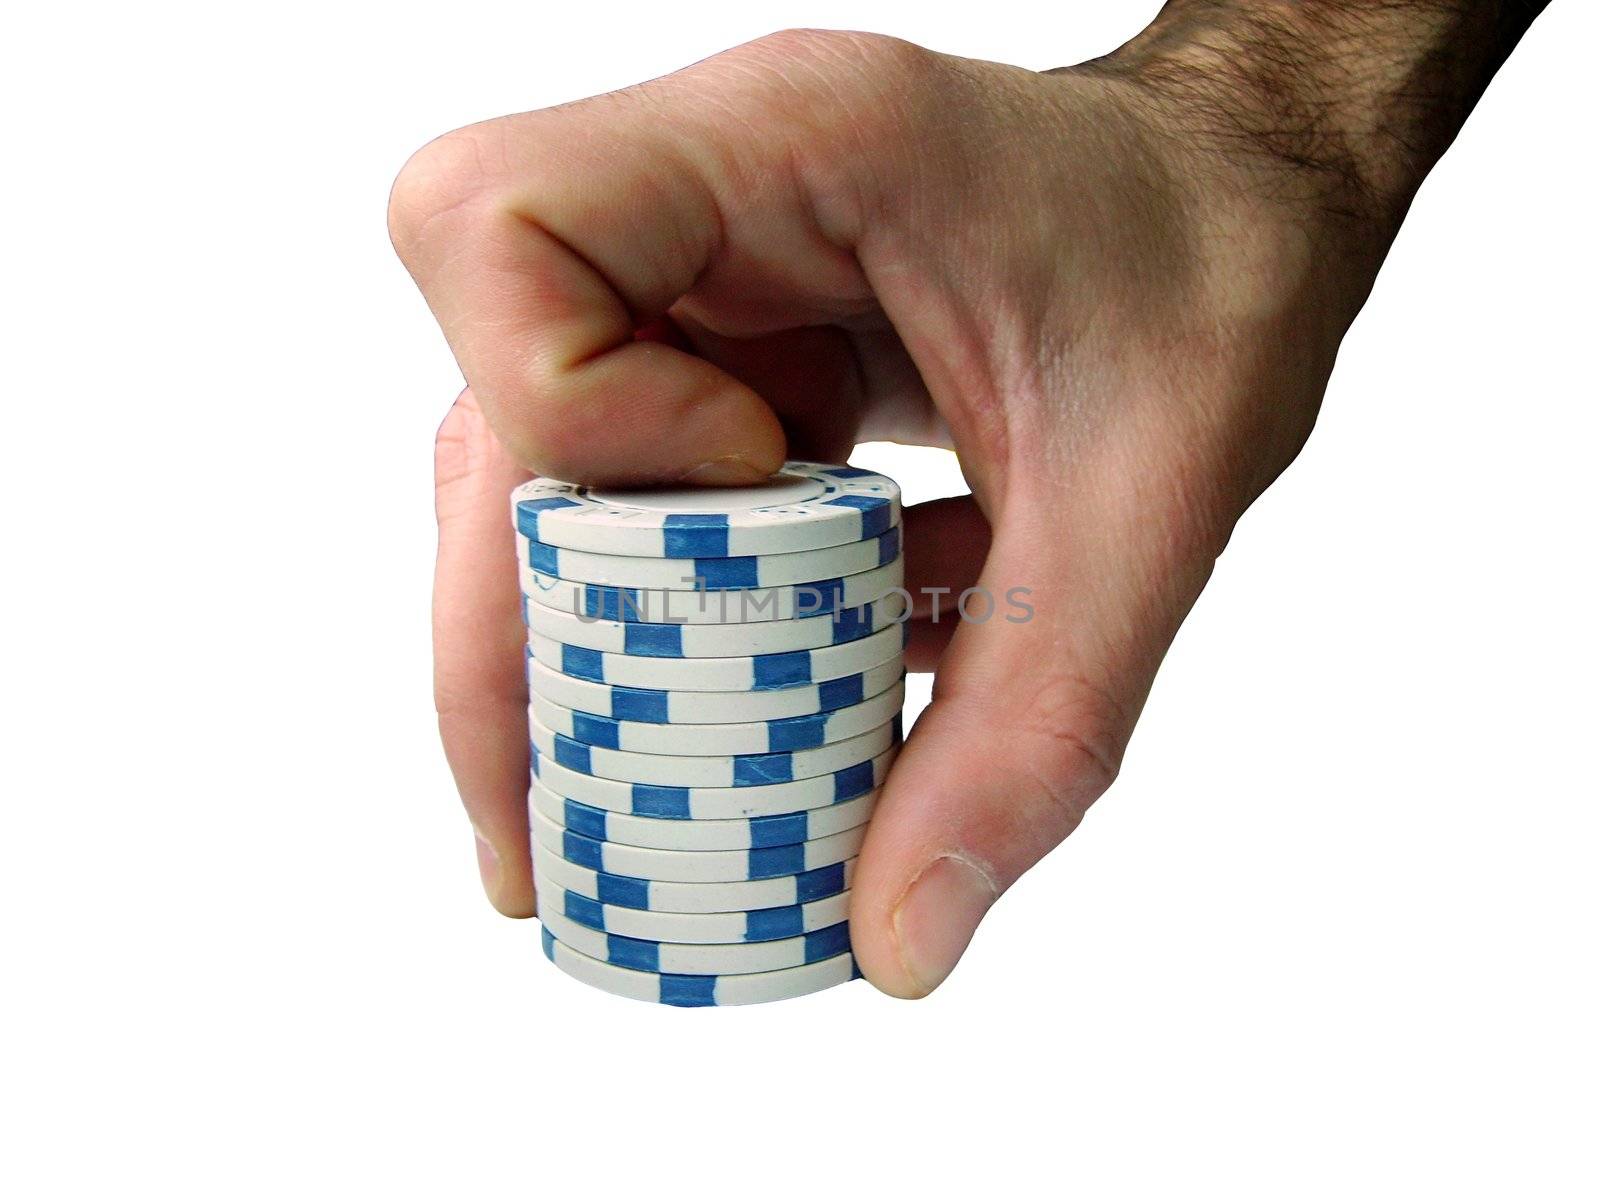 image with a hand making cutting with casino chips